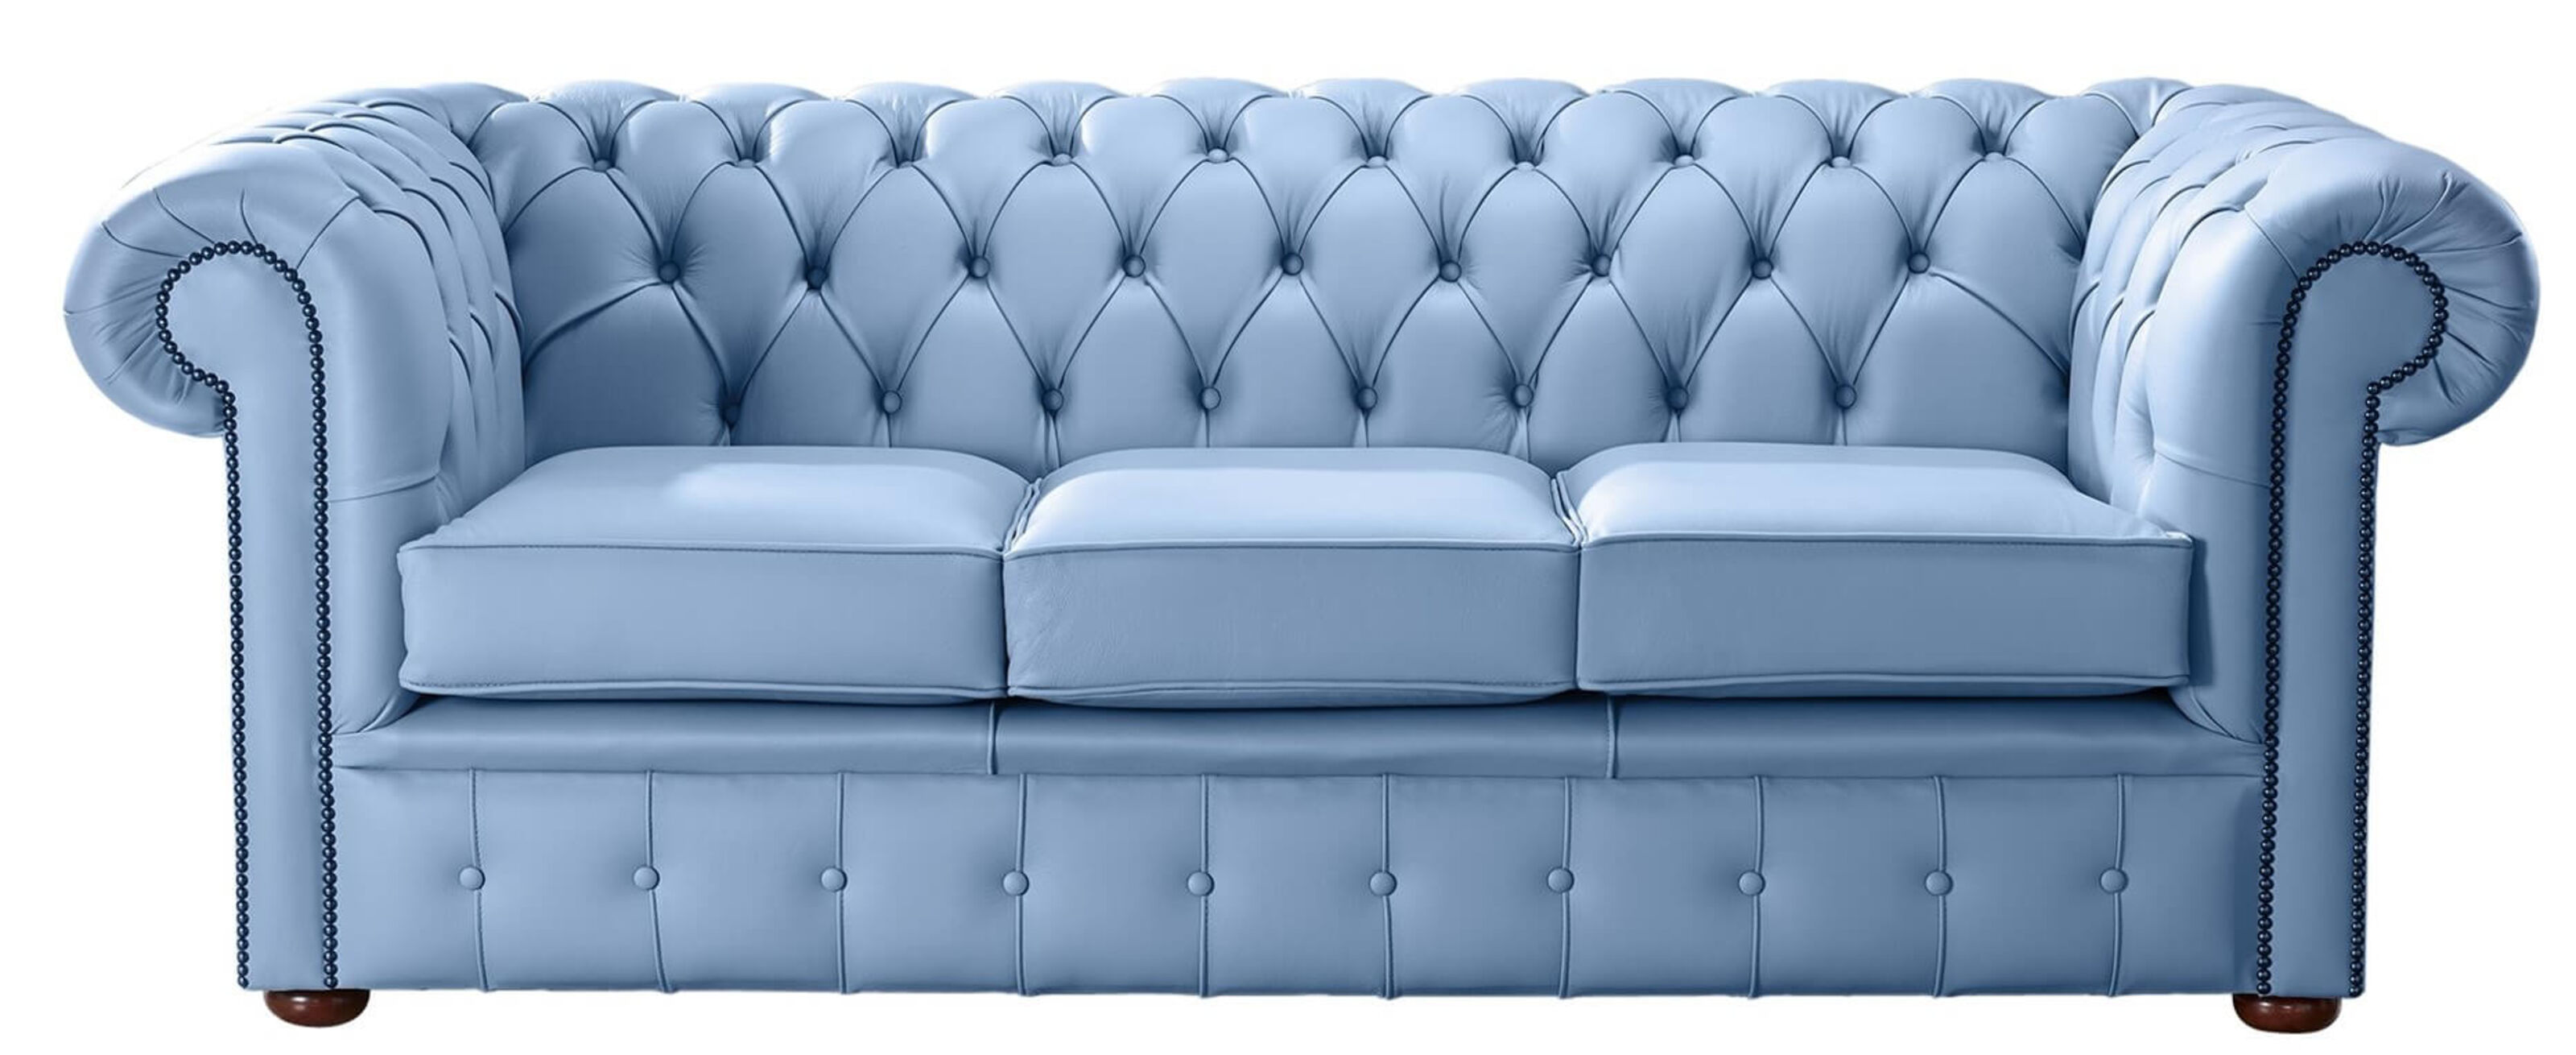 Leather Sofas: The Real Deal for Ultimate Comfort  %Post Title